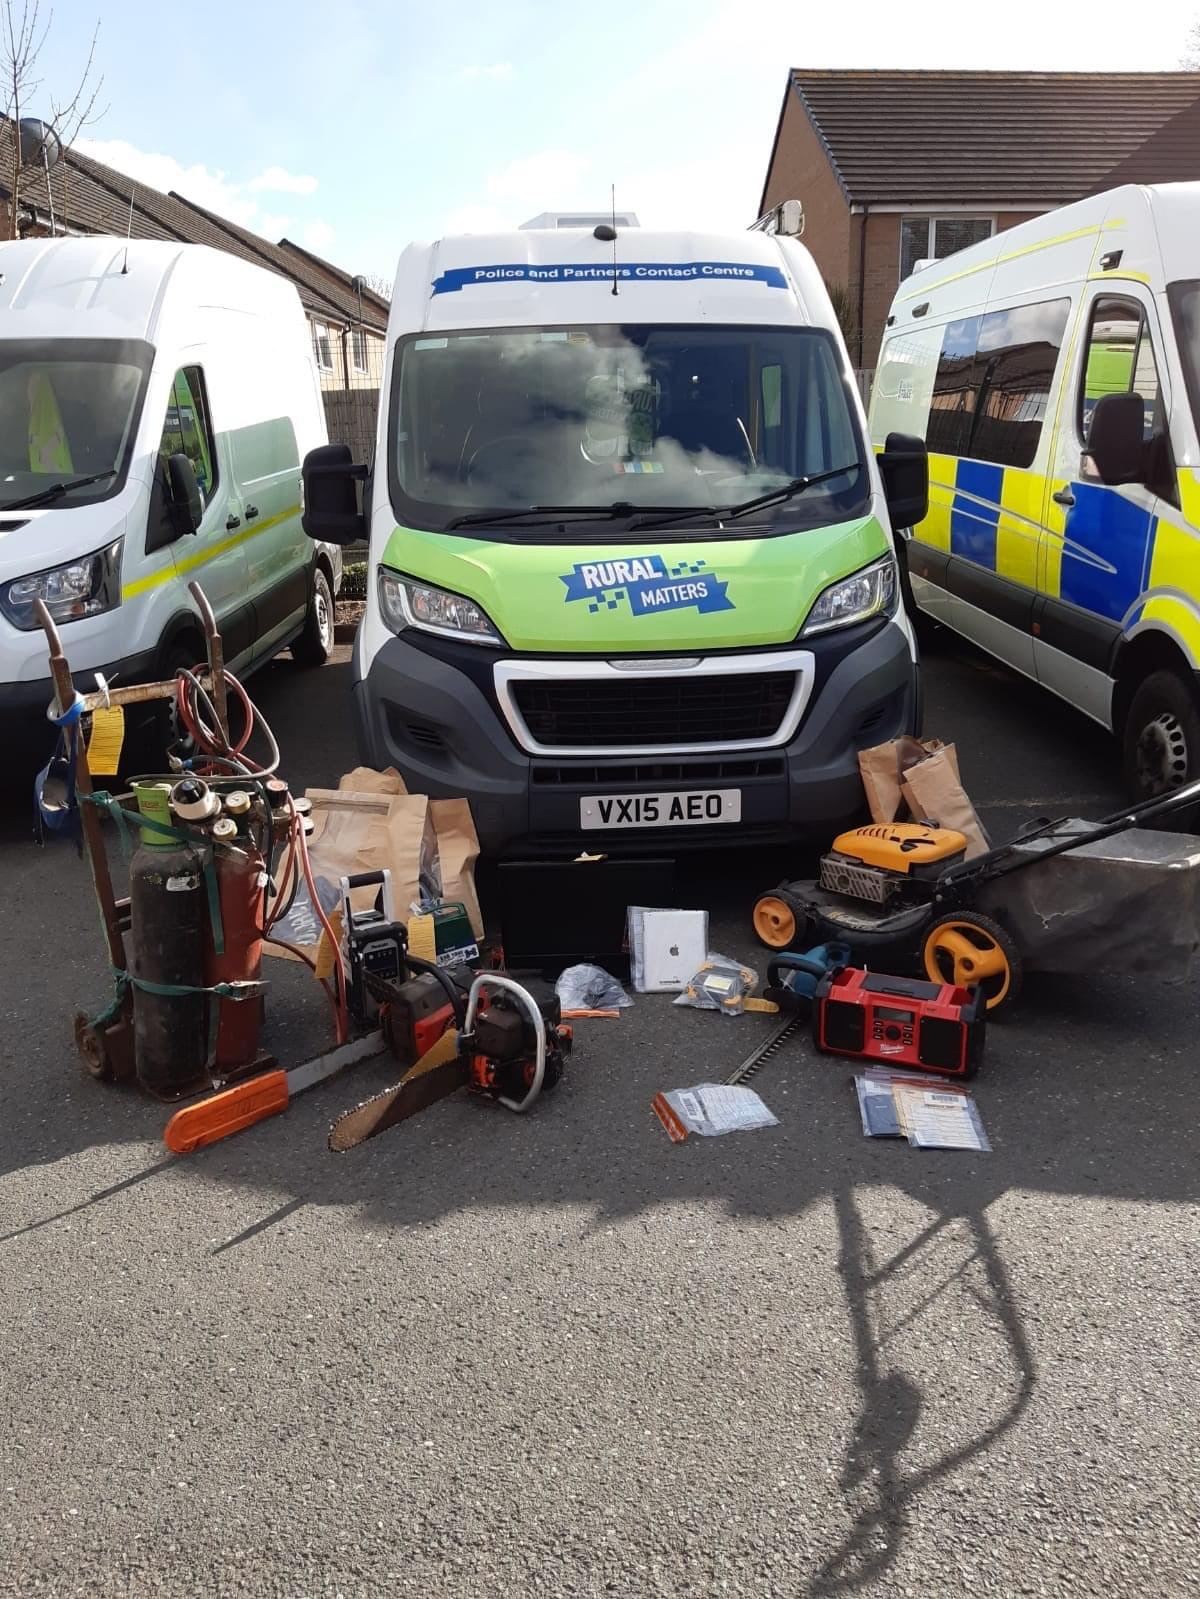 NEWS | Police search for owners of items after large quantity of stolen items recovered from a property in Herefordshire